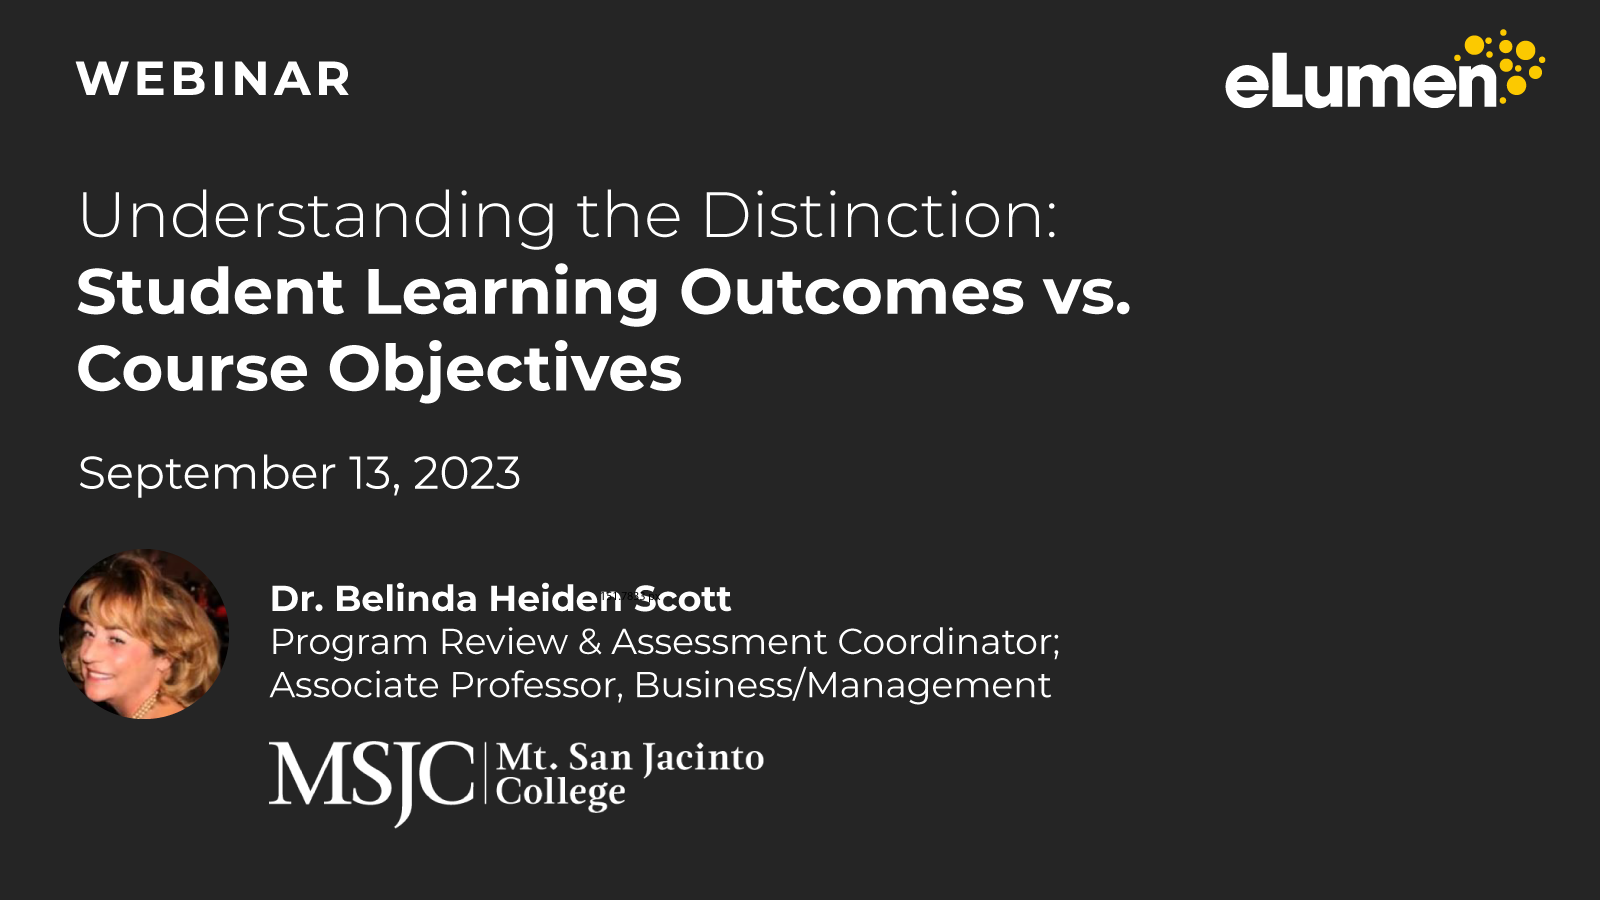 WEBINAR | Understanding the Distinction: Student Learning Outcomes vs. Course Objectives